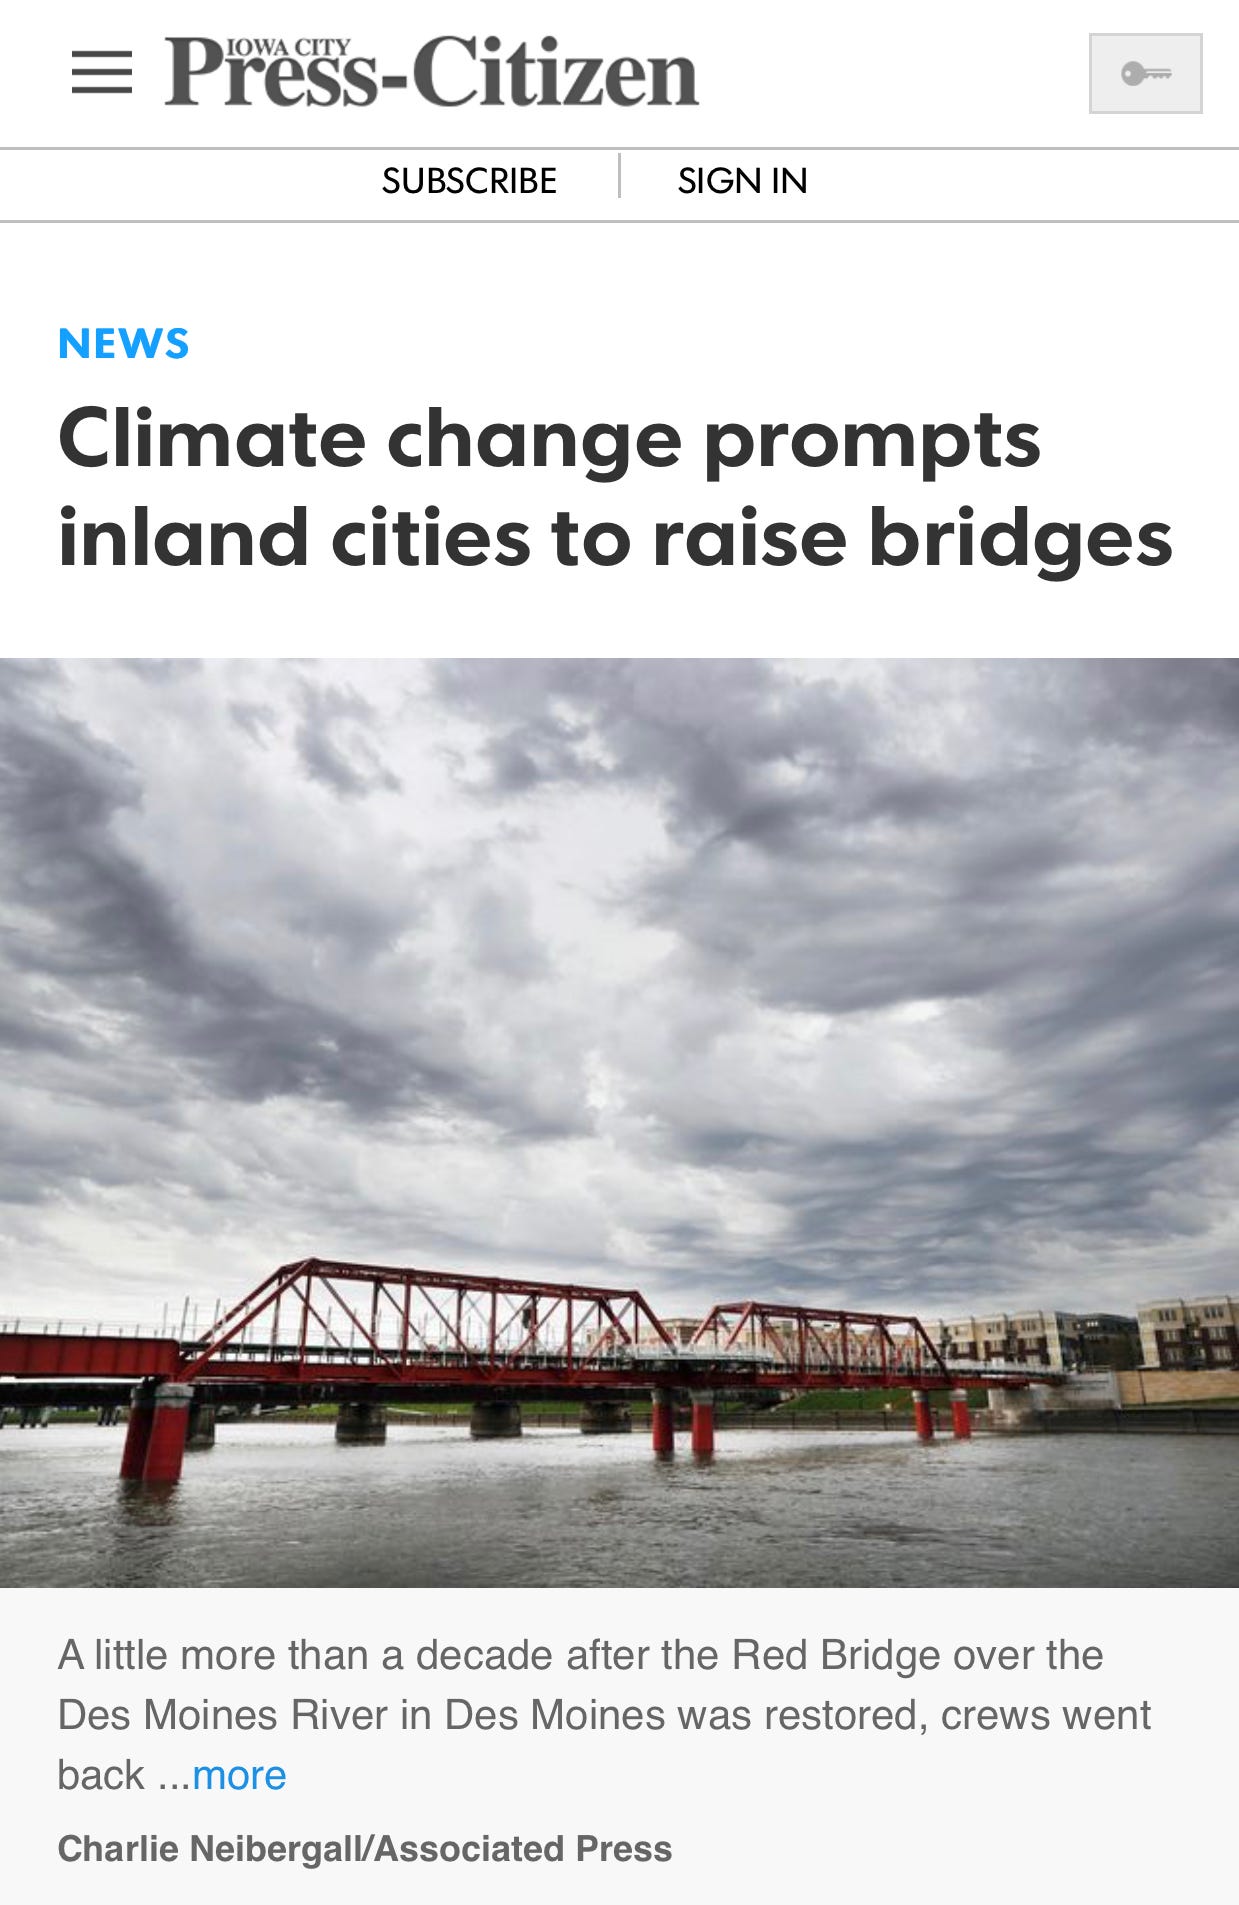 Iowa City Press Citizen front page with headline: Climate change prompts inland cities to raise bridges, and a phot of a red bridge in Des Moines, Iowa